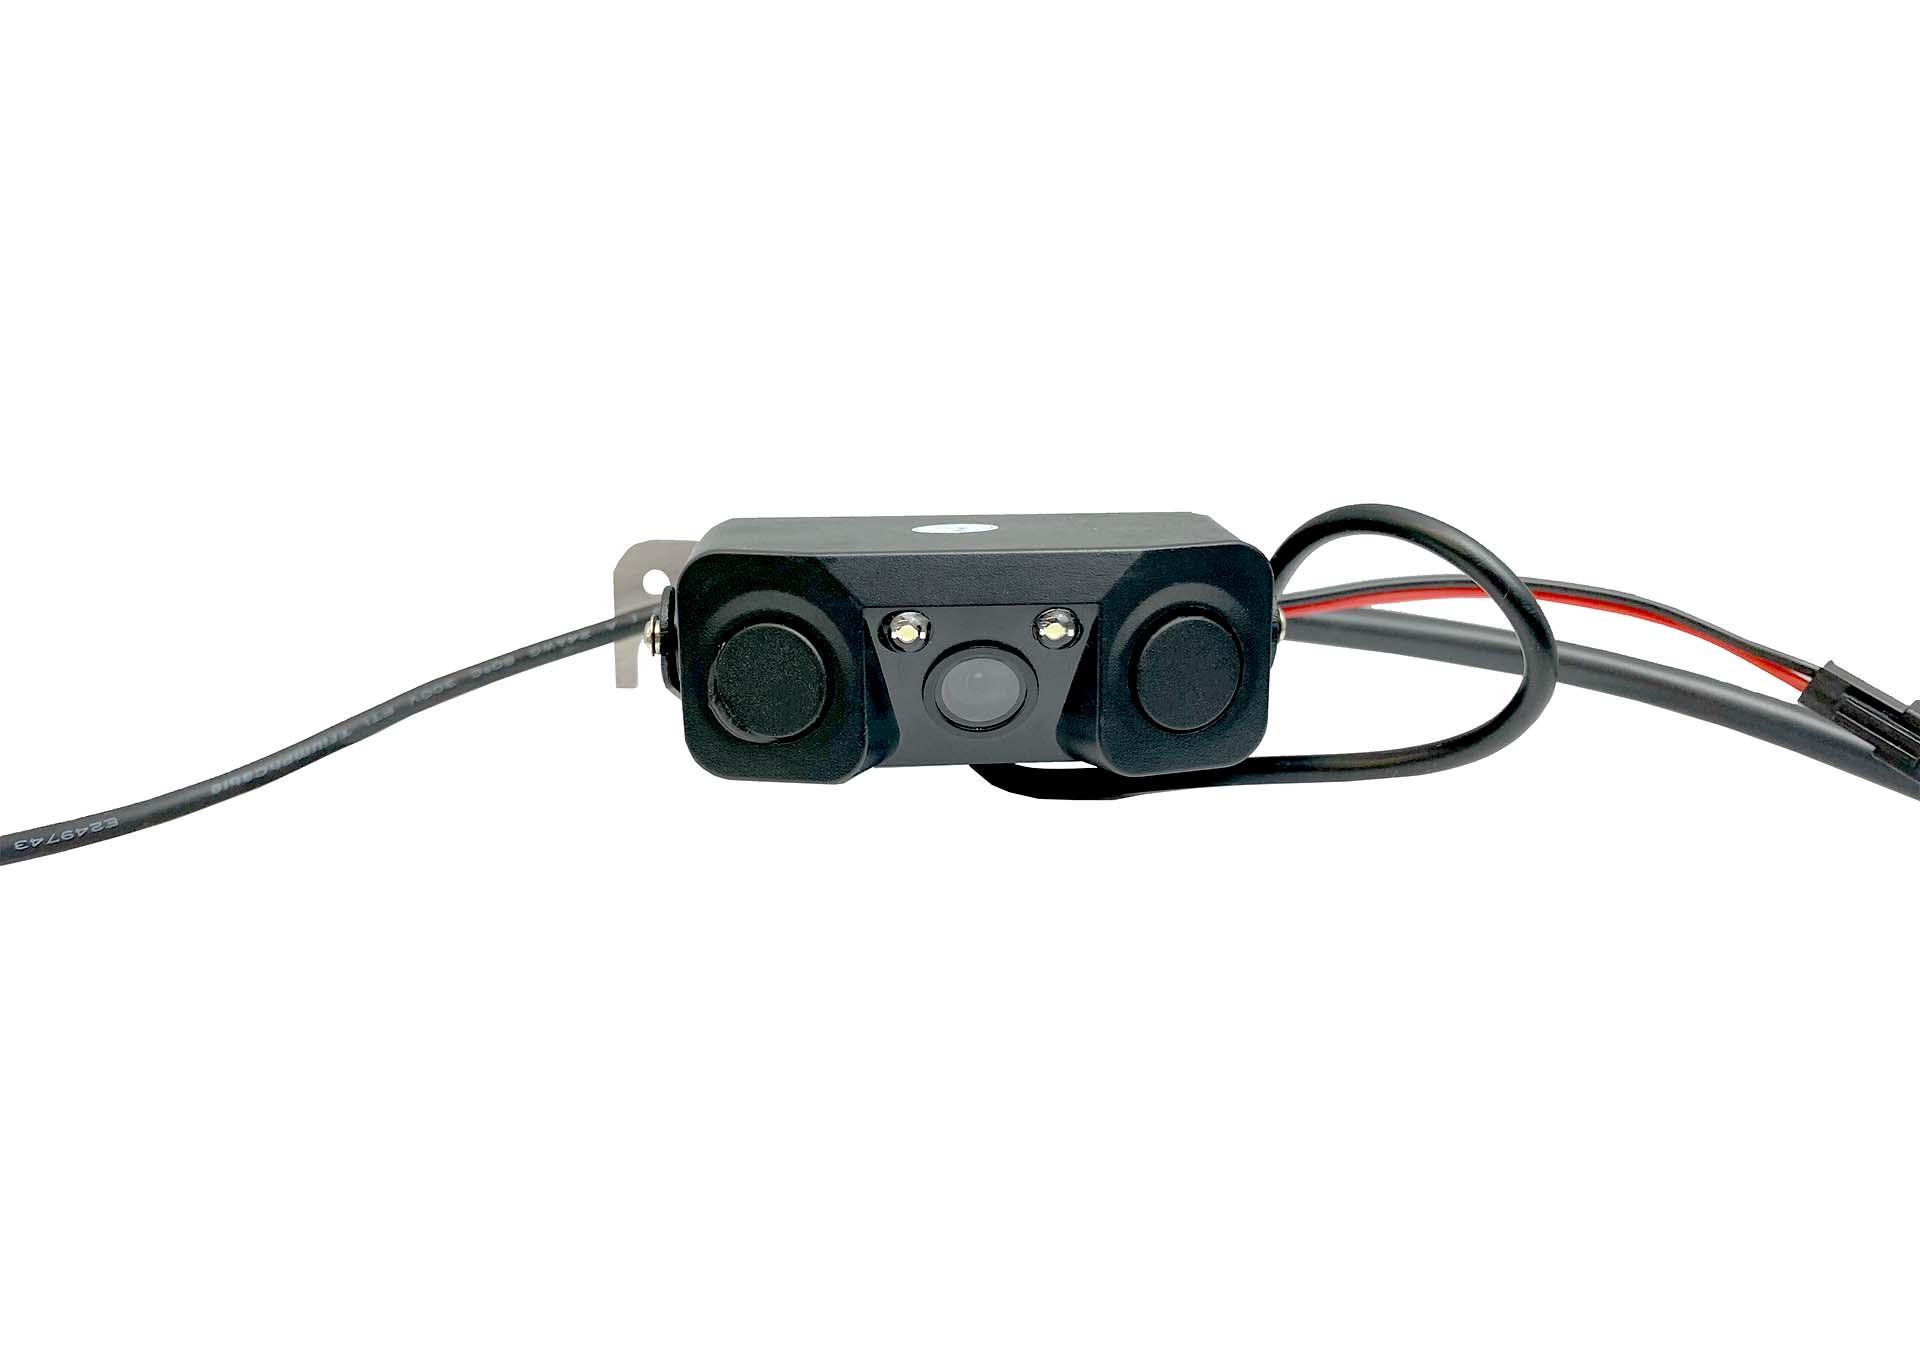 Aware 2 Rear View Camera System for PowerChairs and Scooters